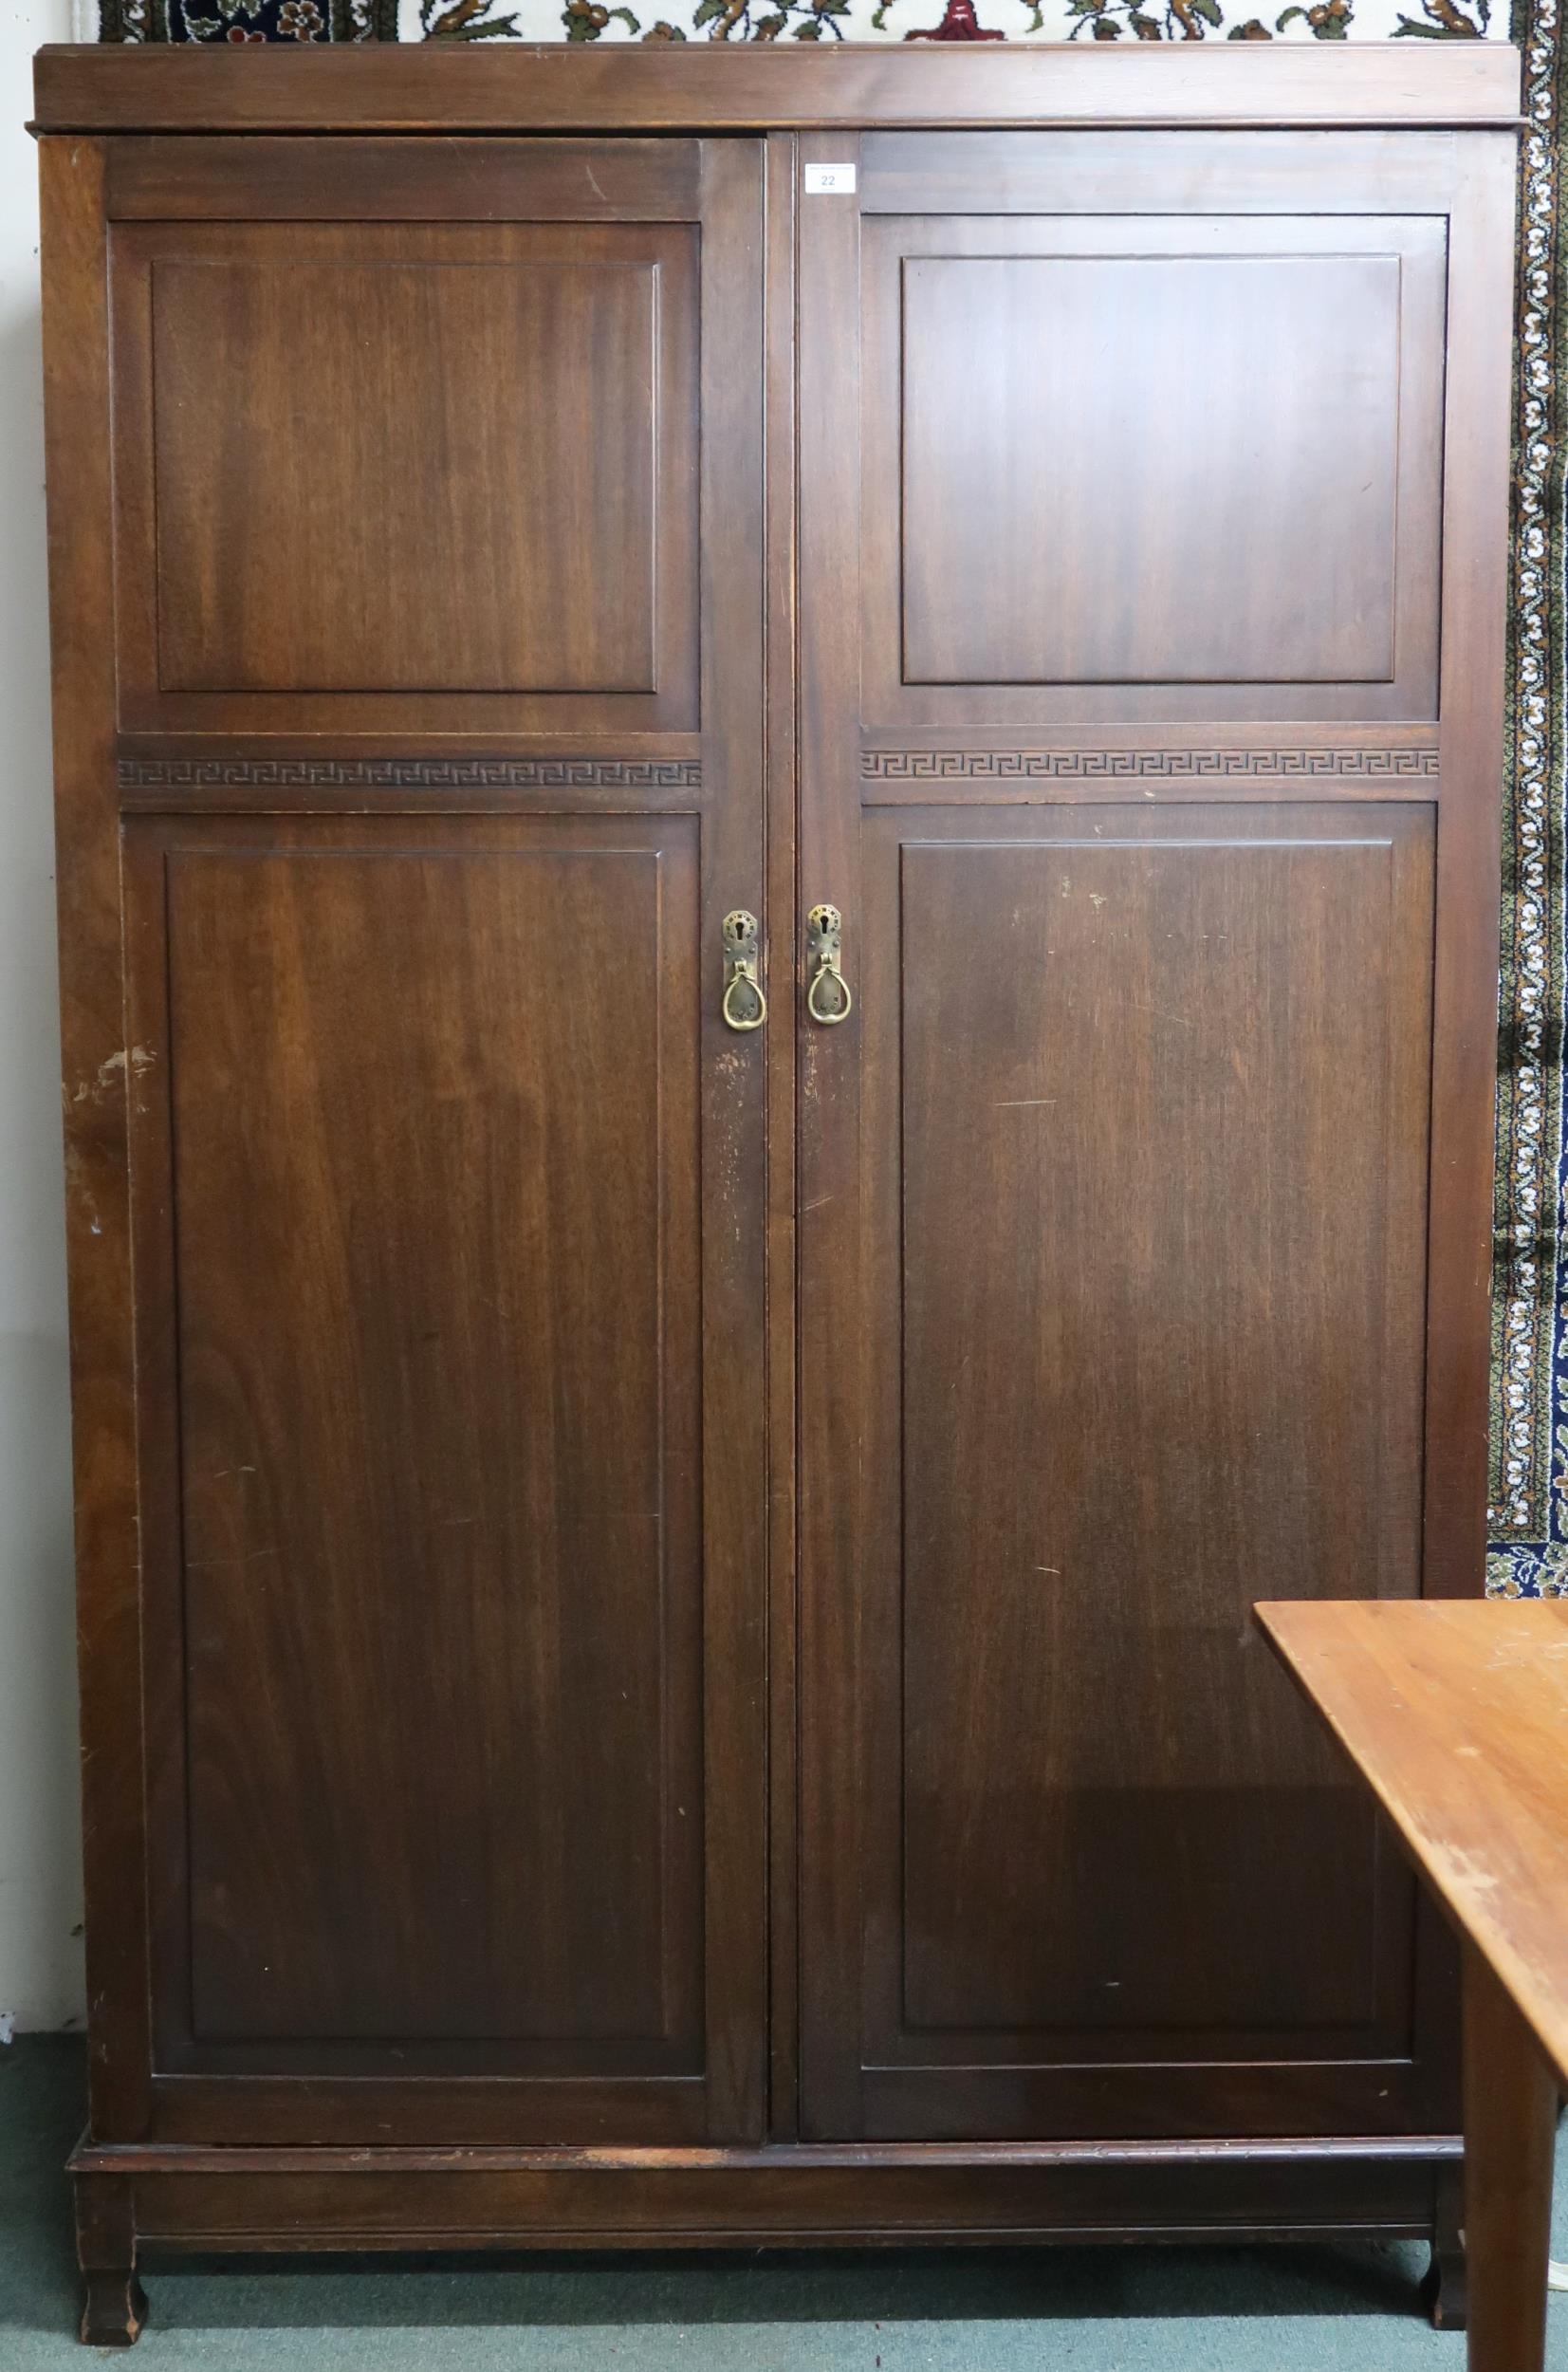 An early 20th century mahogany compactum wardrobe with pair of doors carved with Grecian key